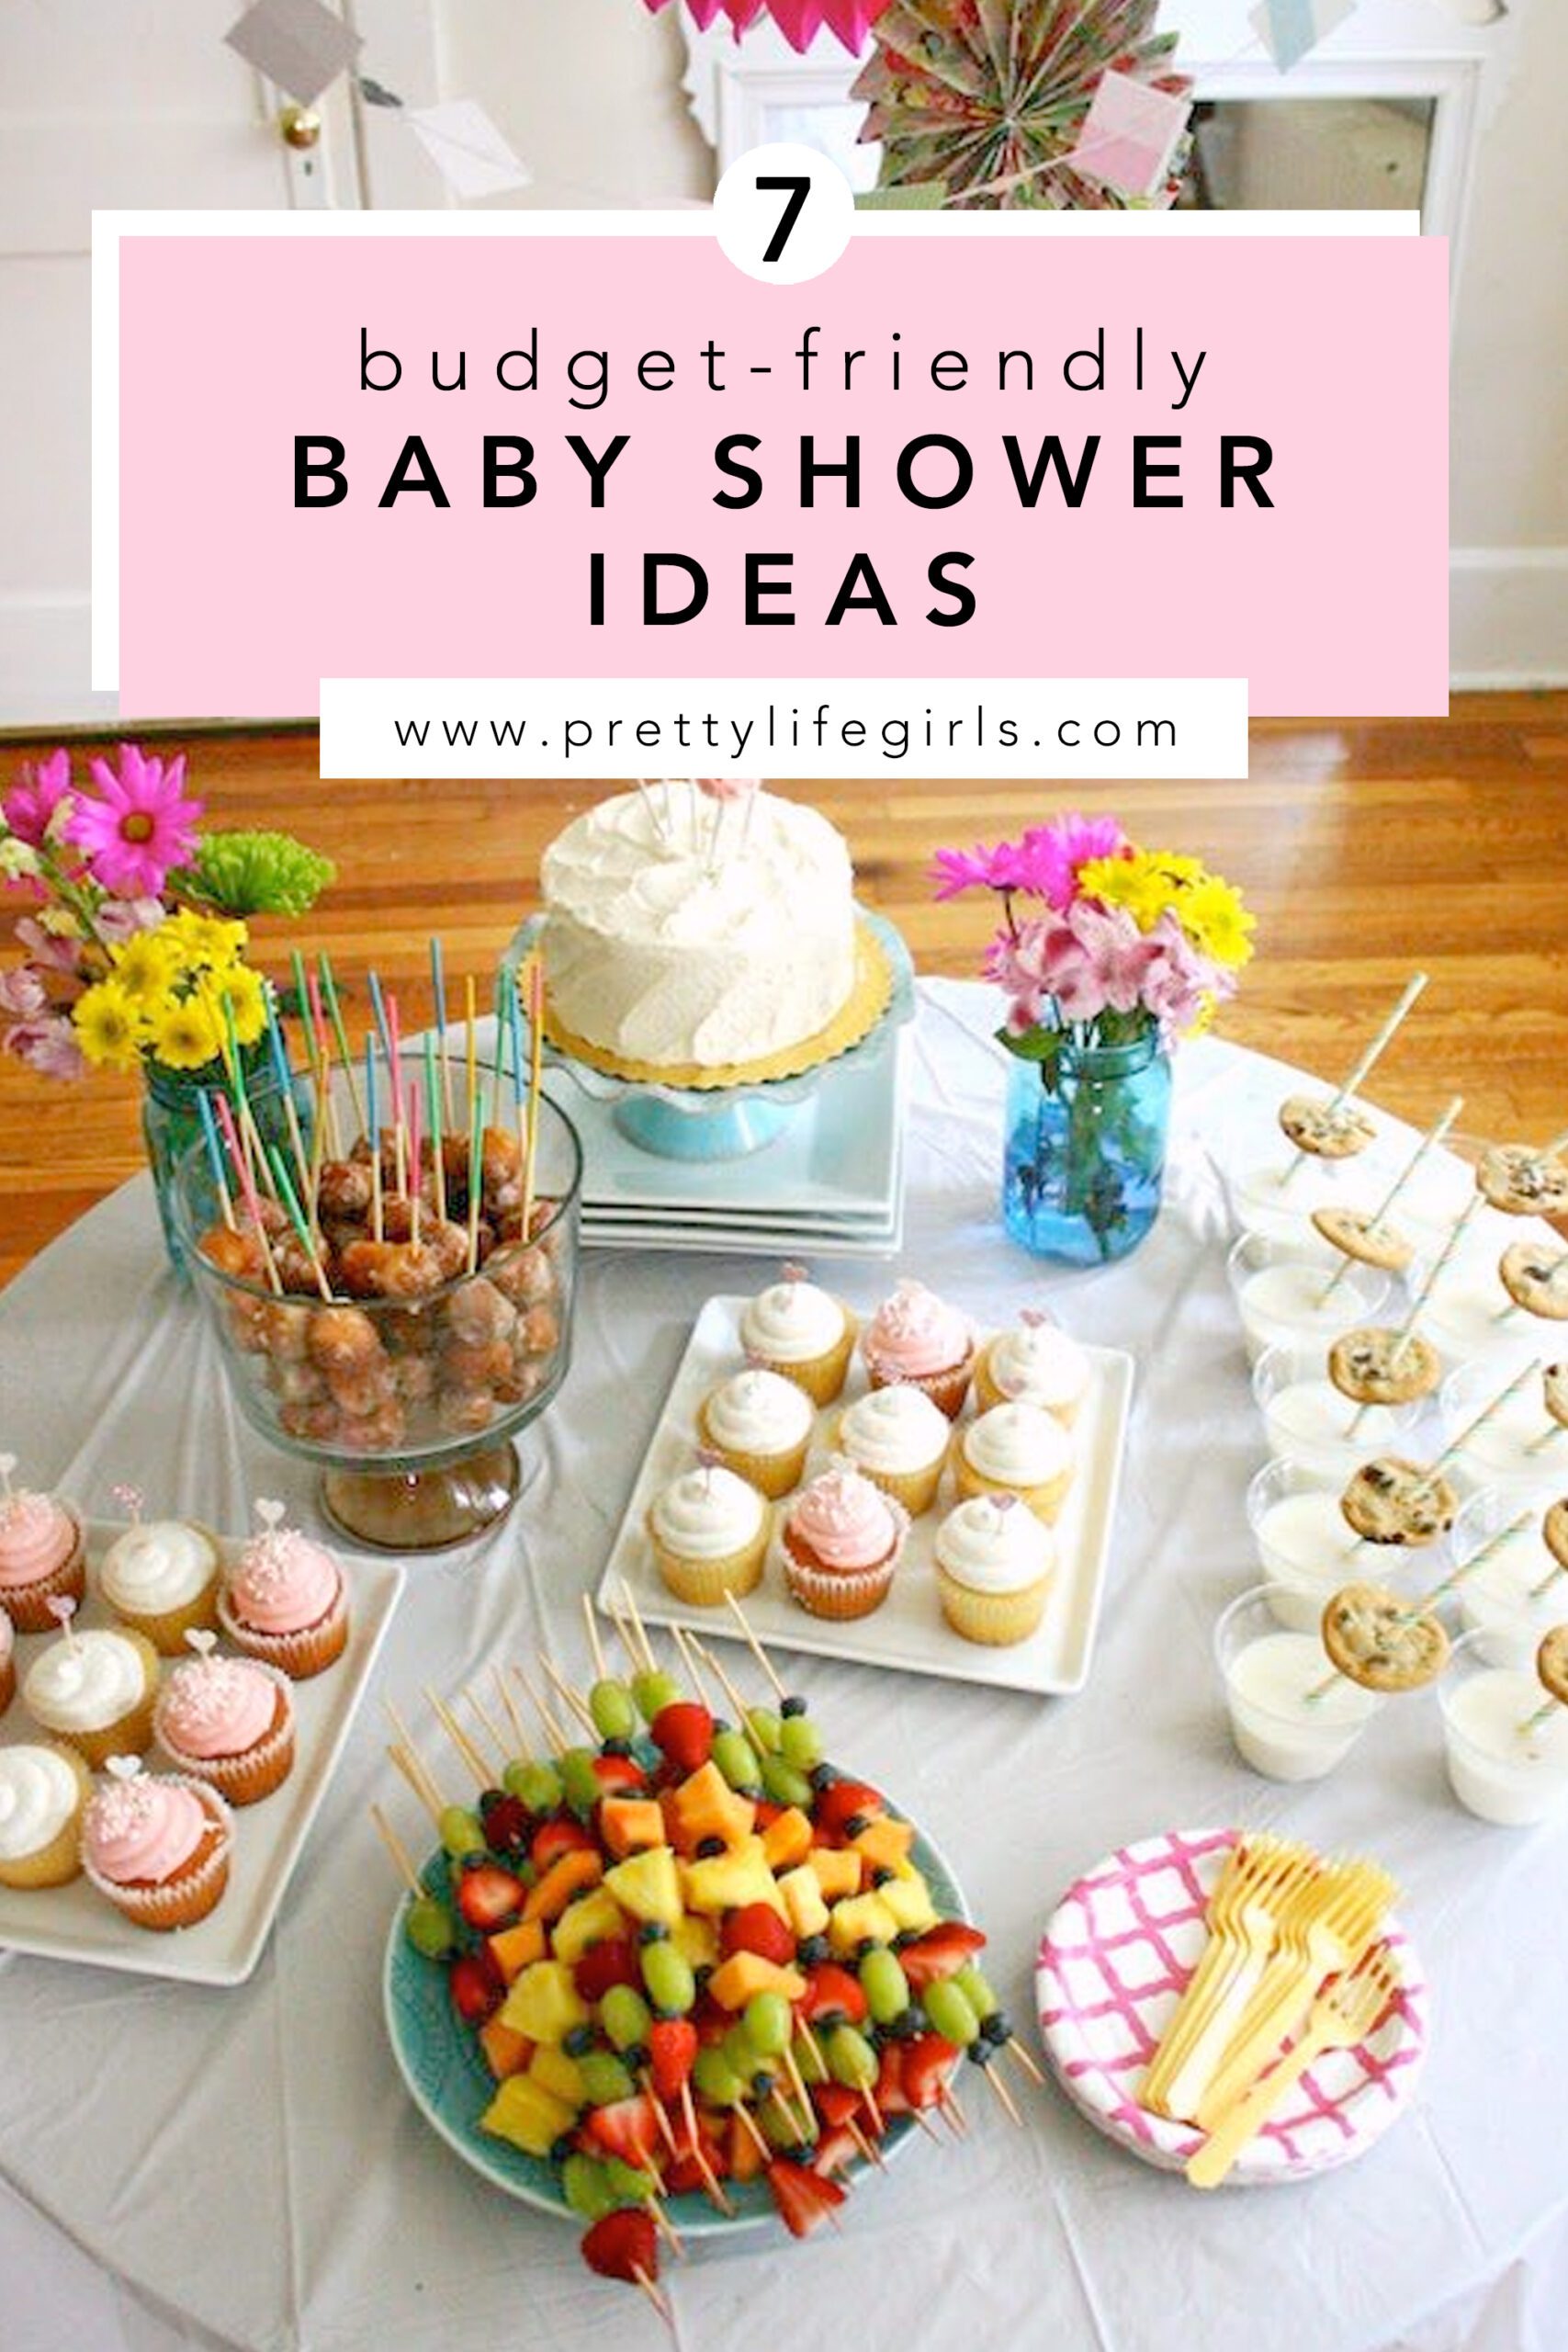 Discounted baby shower supplies